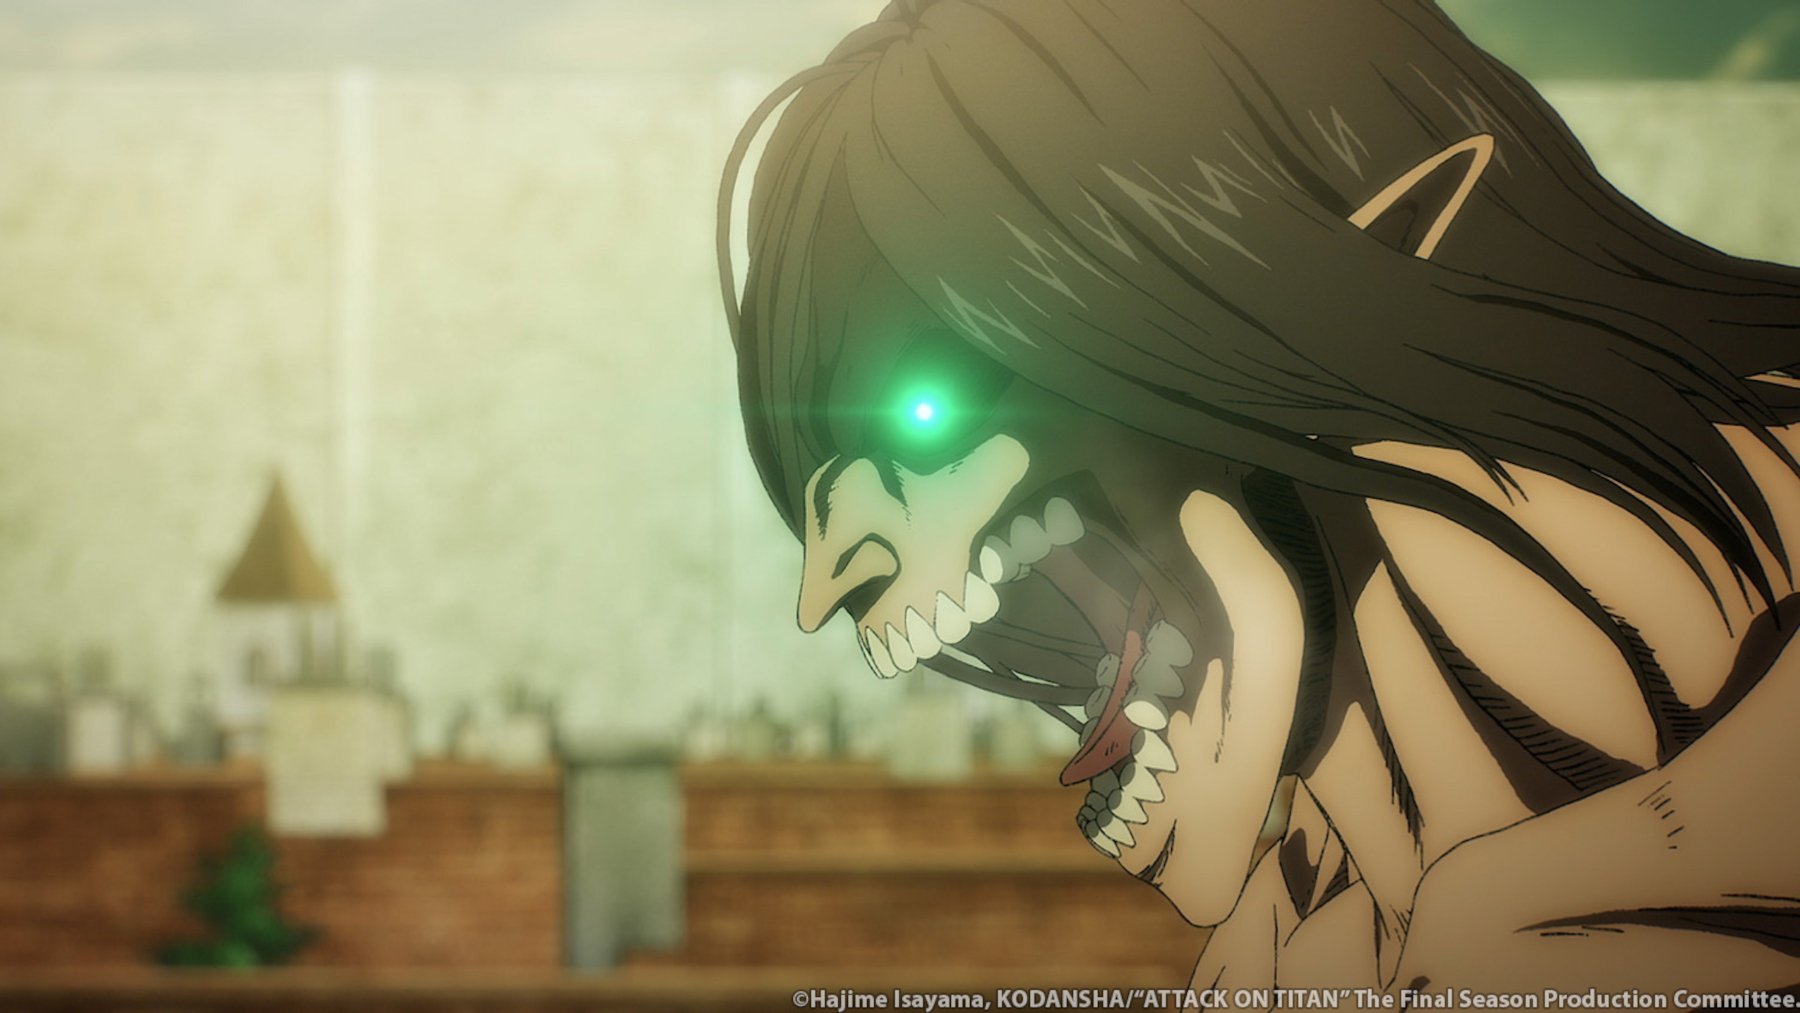 A still of 'Attack on Titan' Season 4 Part 2 for our list of best anime of 2022. It shows the side view of Eren Yeager's Titan. His eyes are glowing green, and his mouth is open.